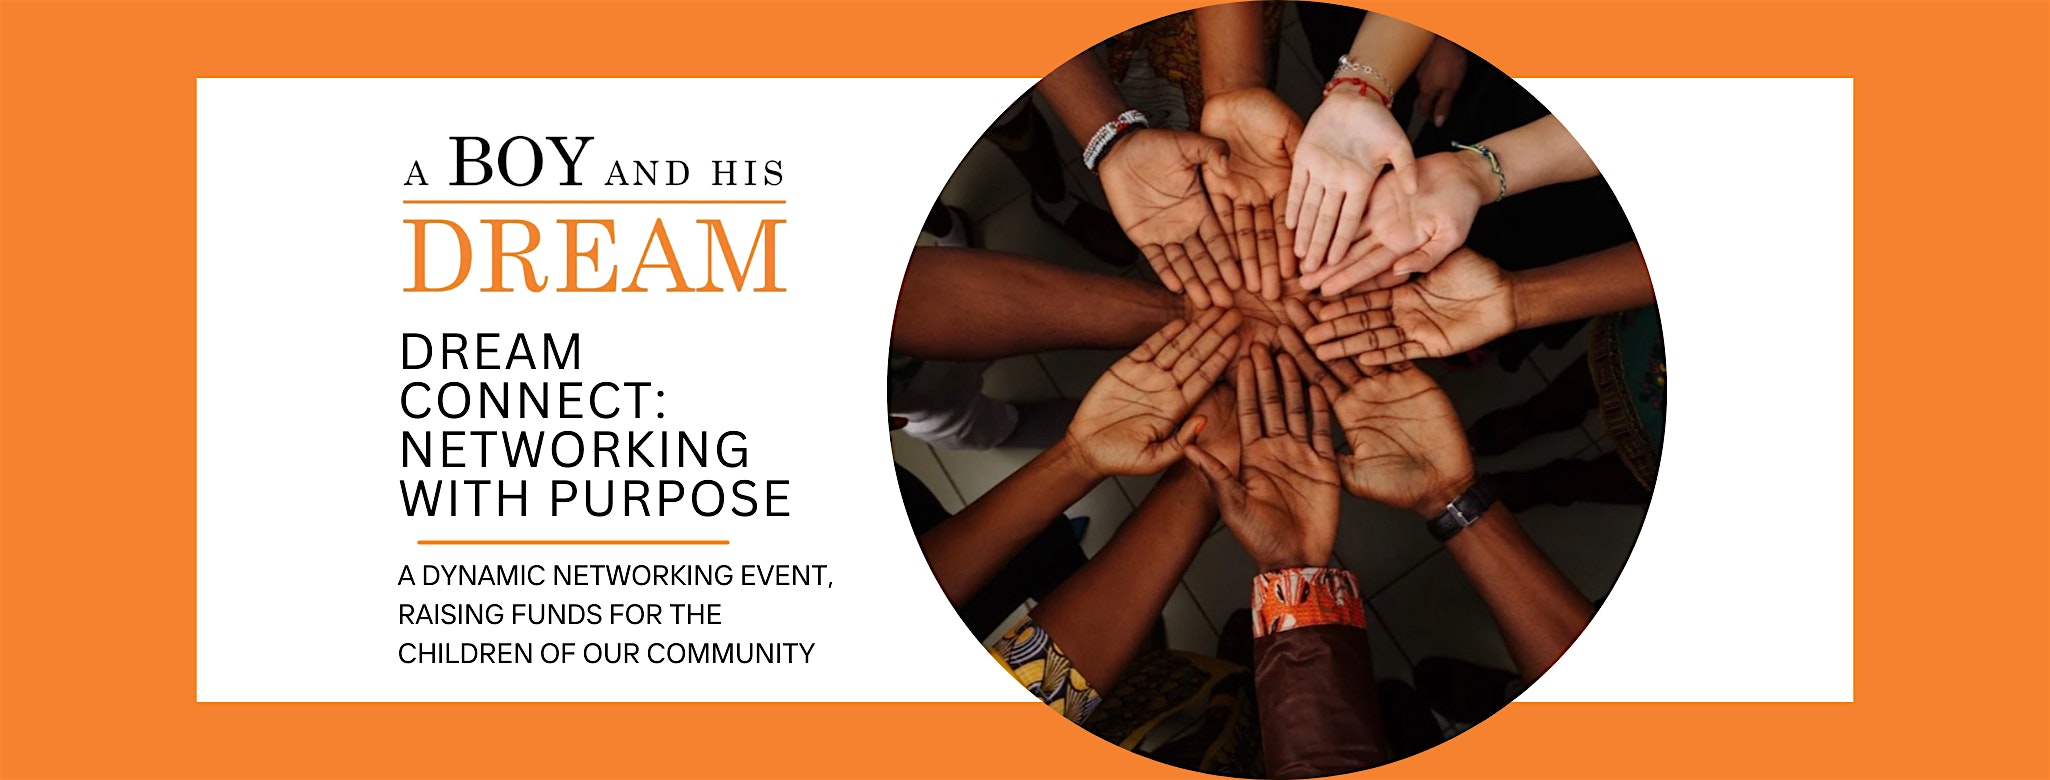 A Boy and His Dream Presents- DreamConnect: Networking with Purpose